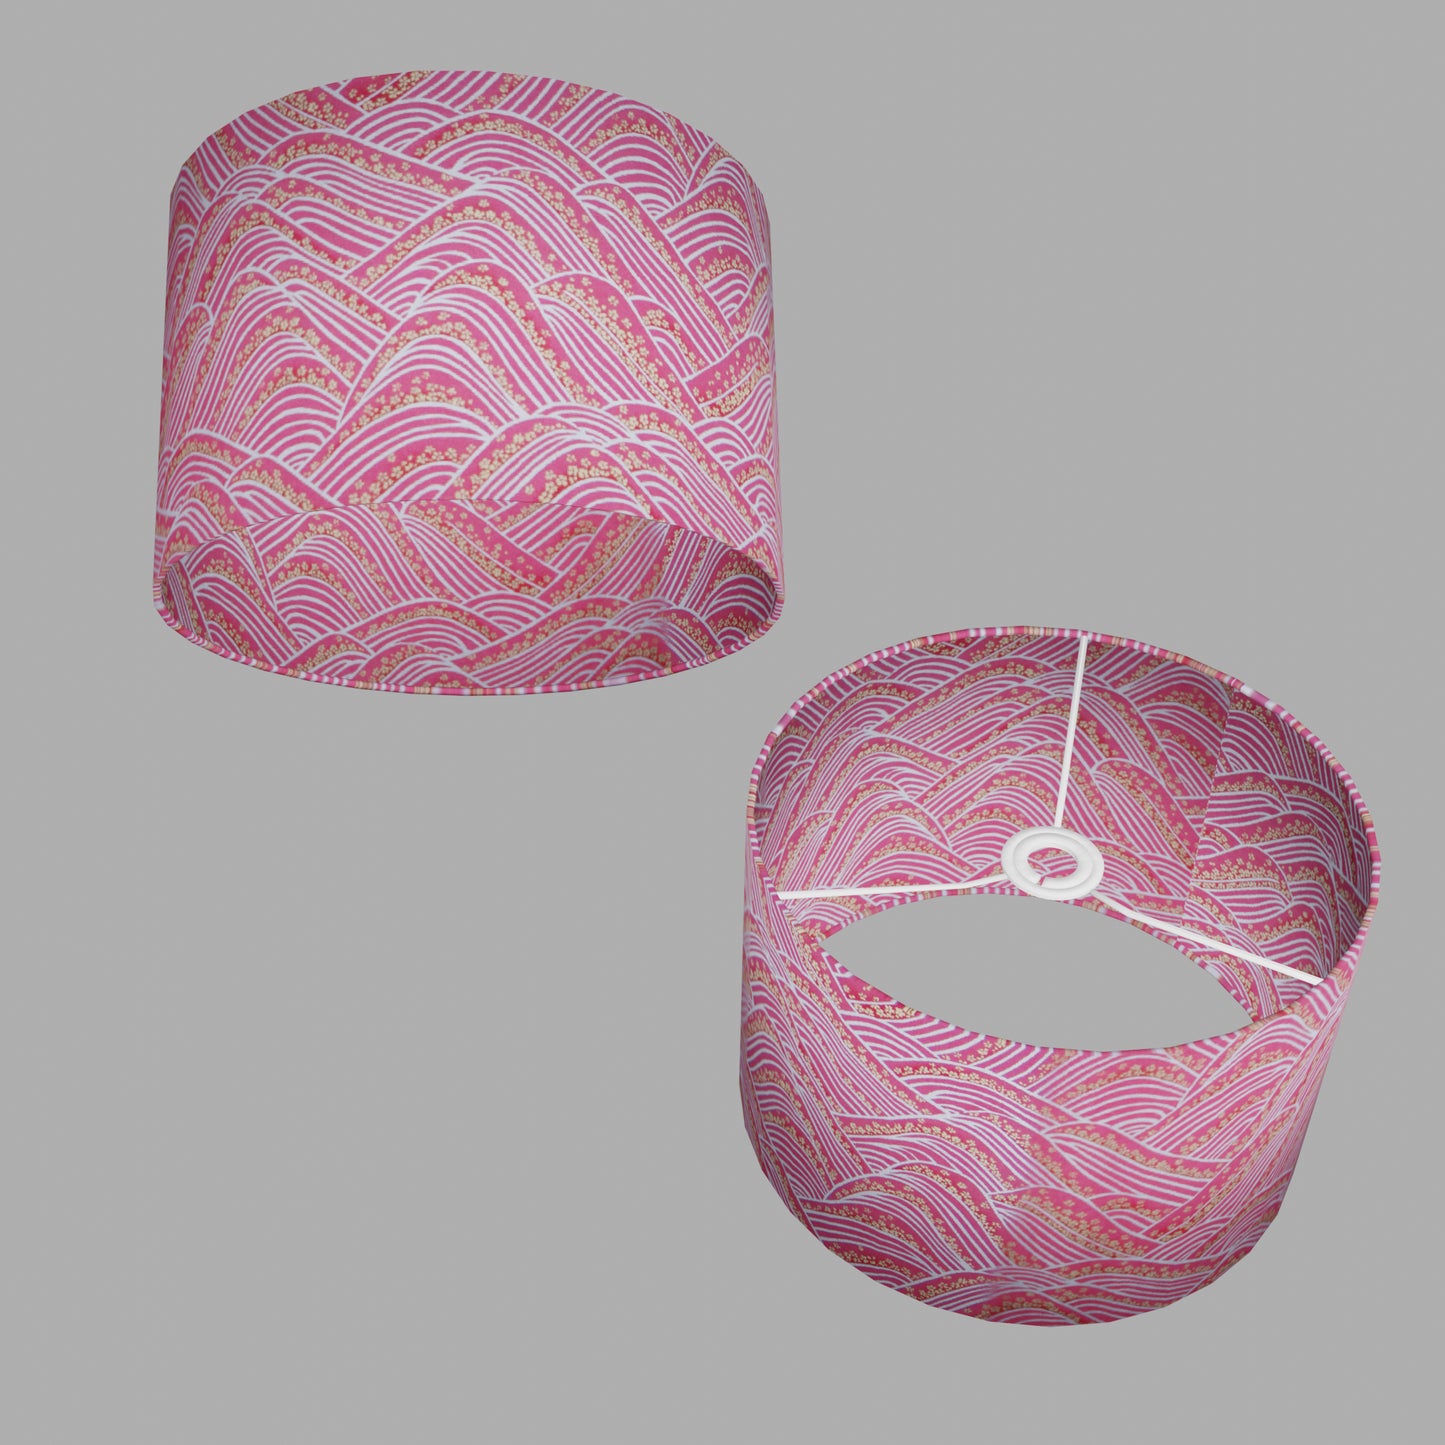 Drum Lamp Shade - W04 ~ Pink Hills with Gold Flowers, 30cm(d) x 20cm(h)